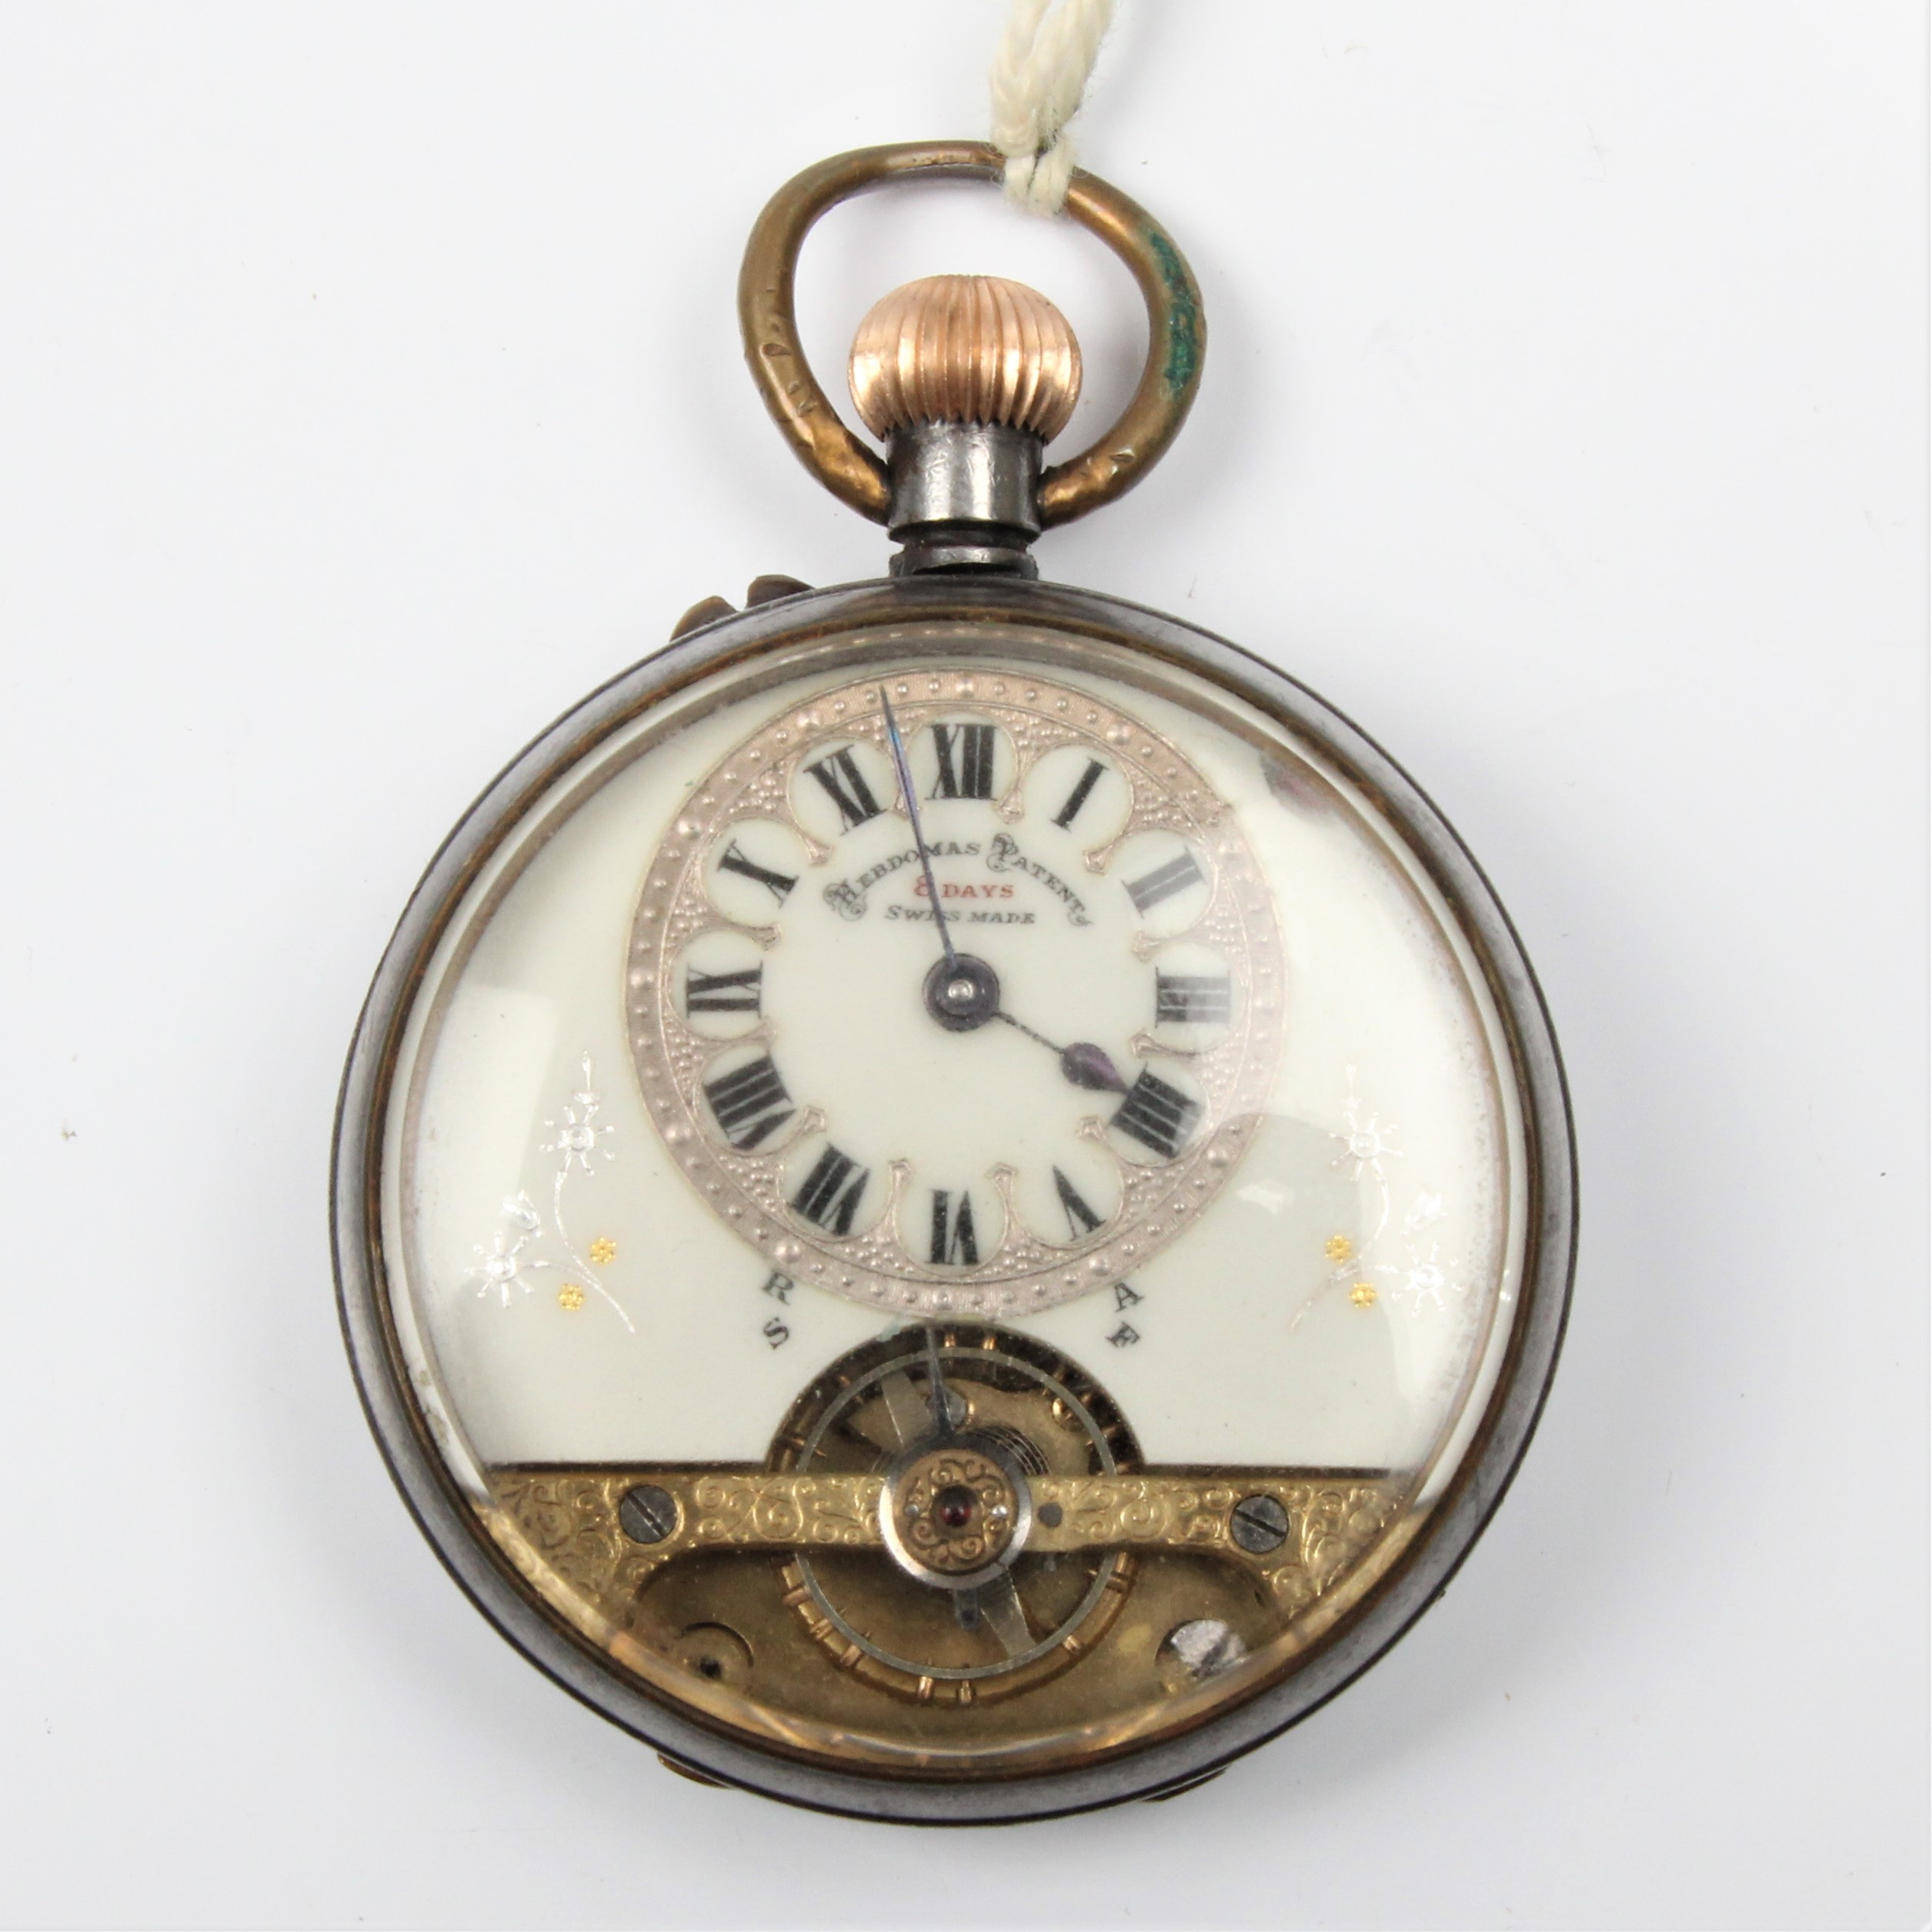 A Hebdomas Patent 8 day pocket watch, the white enamel dial having hourly Roman numeral markers,